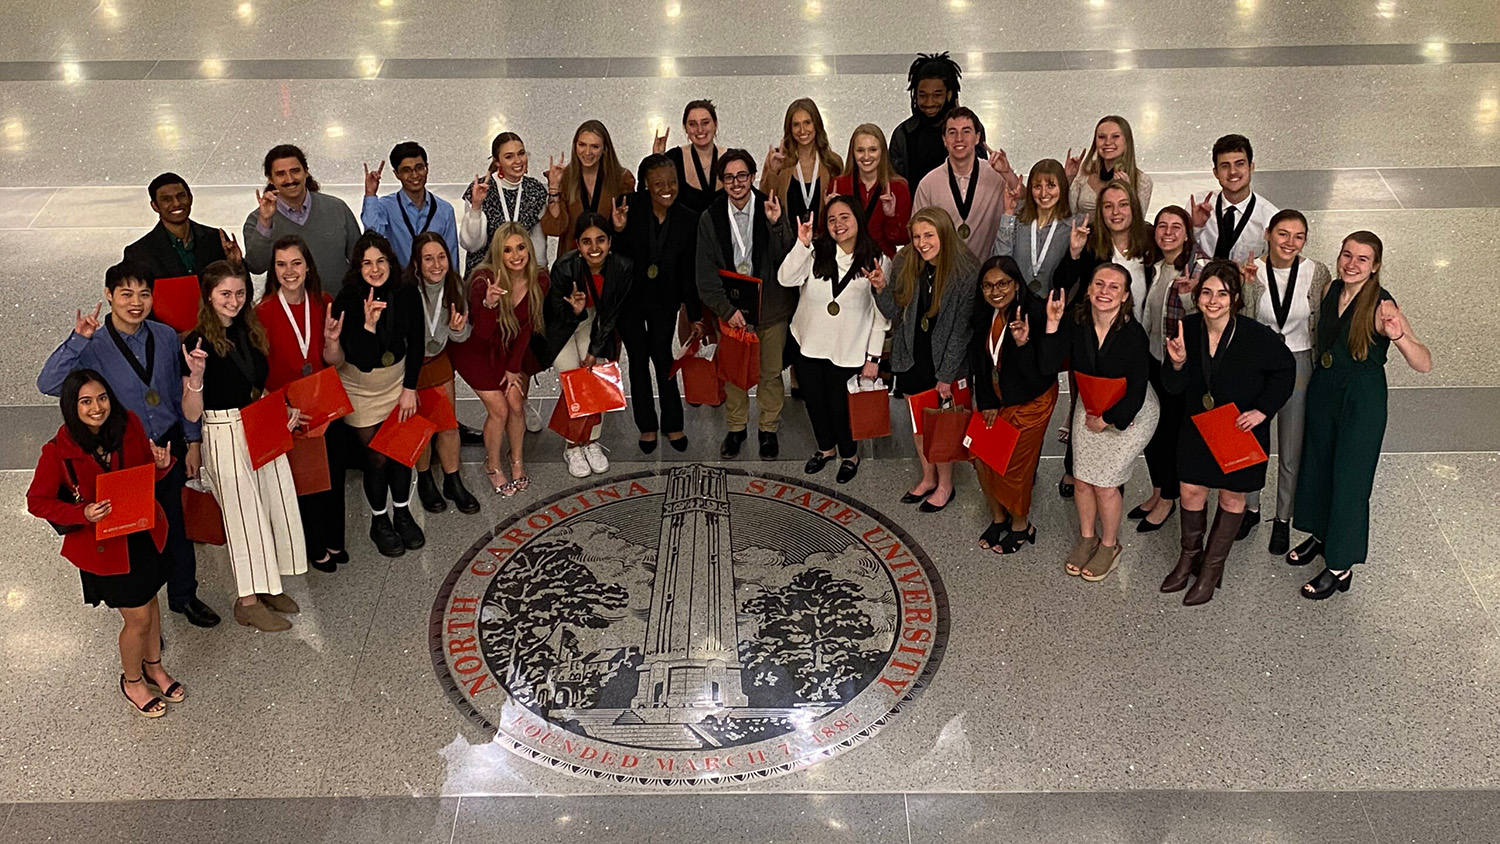 University Honors Program and University Scholars Program graduates stand around the University seal in the lobby of Talley Student Center after the Honors Program Recognition Ceremony on Tuesday, Dec. 12